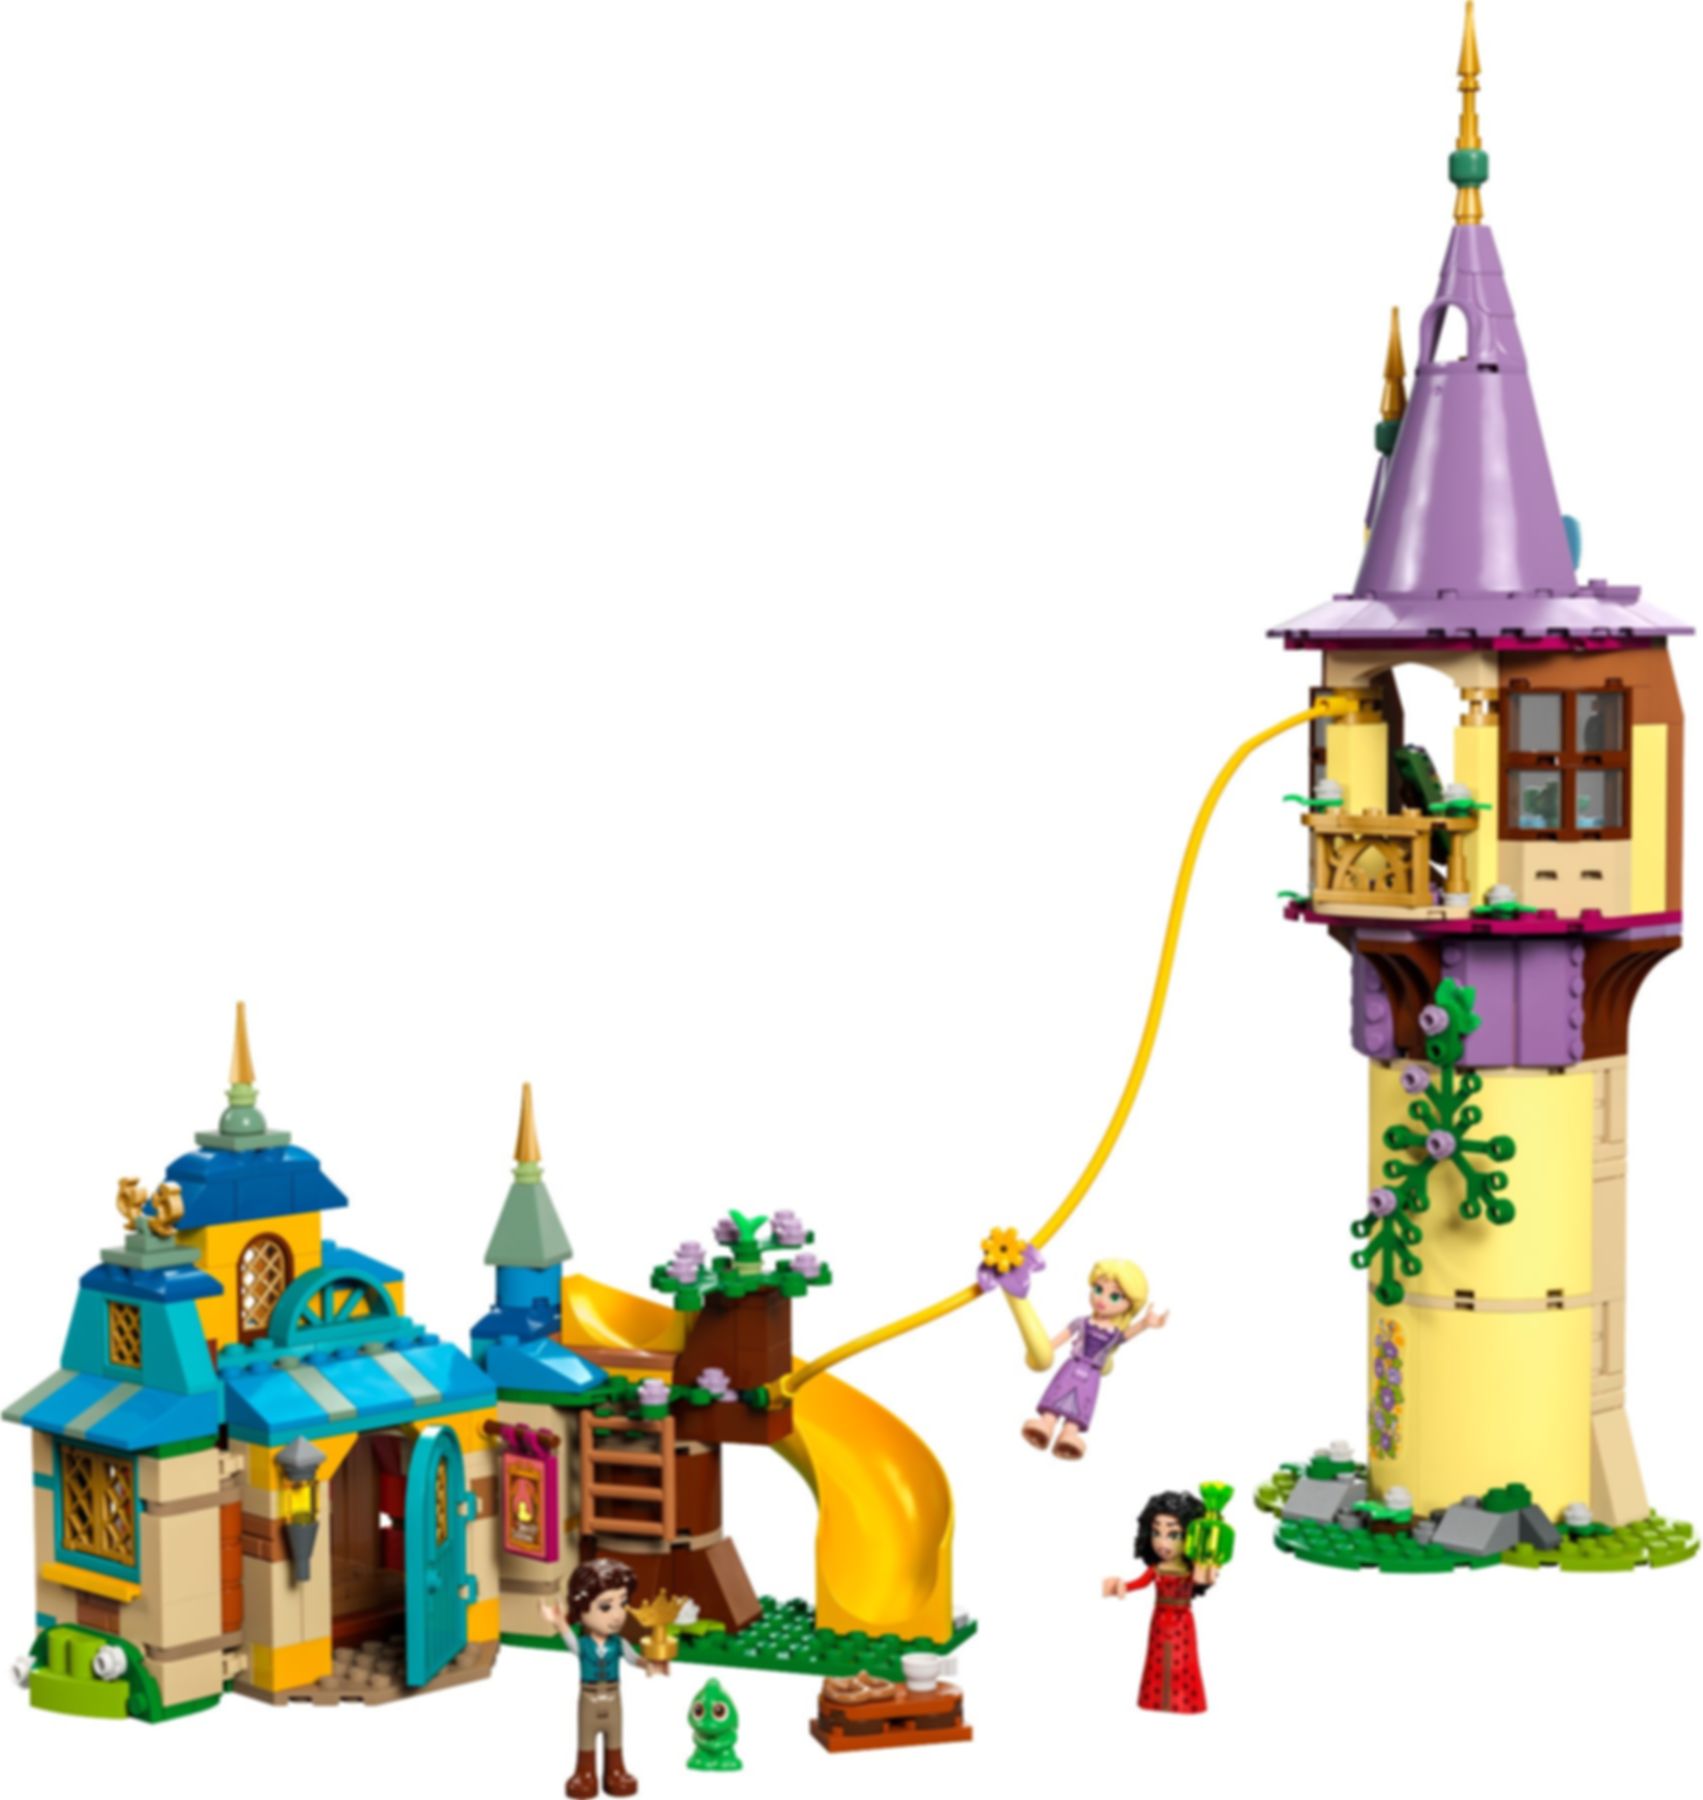 LEGO® Disney Rapunzel's Tower & The Snuggly Duckling components